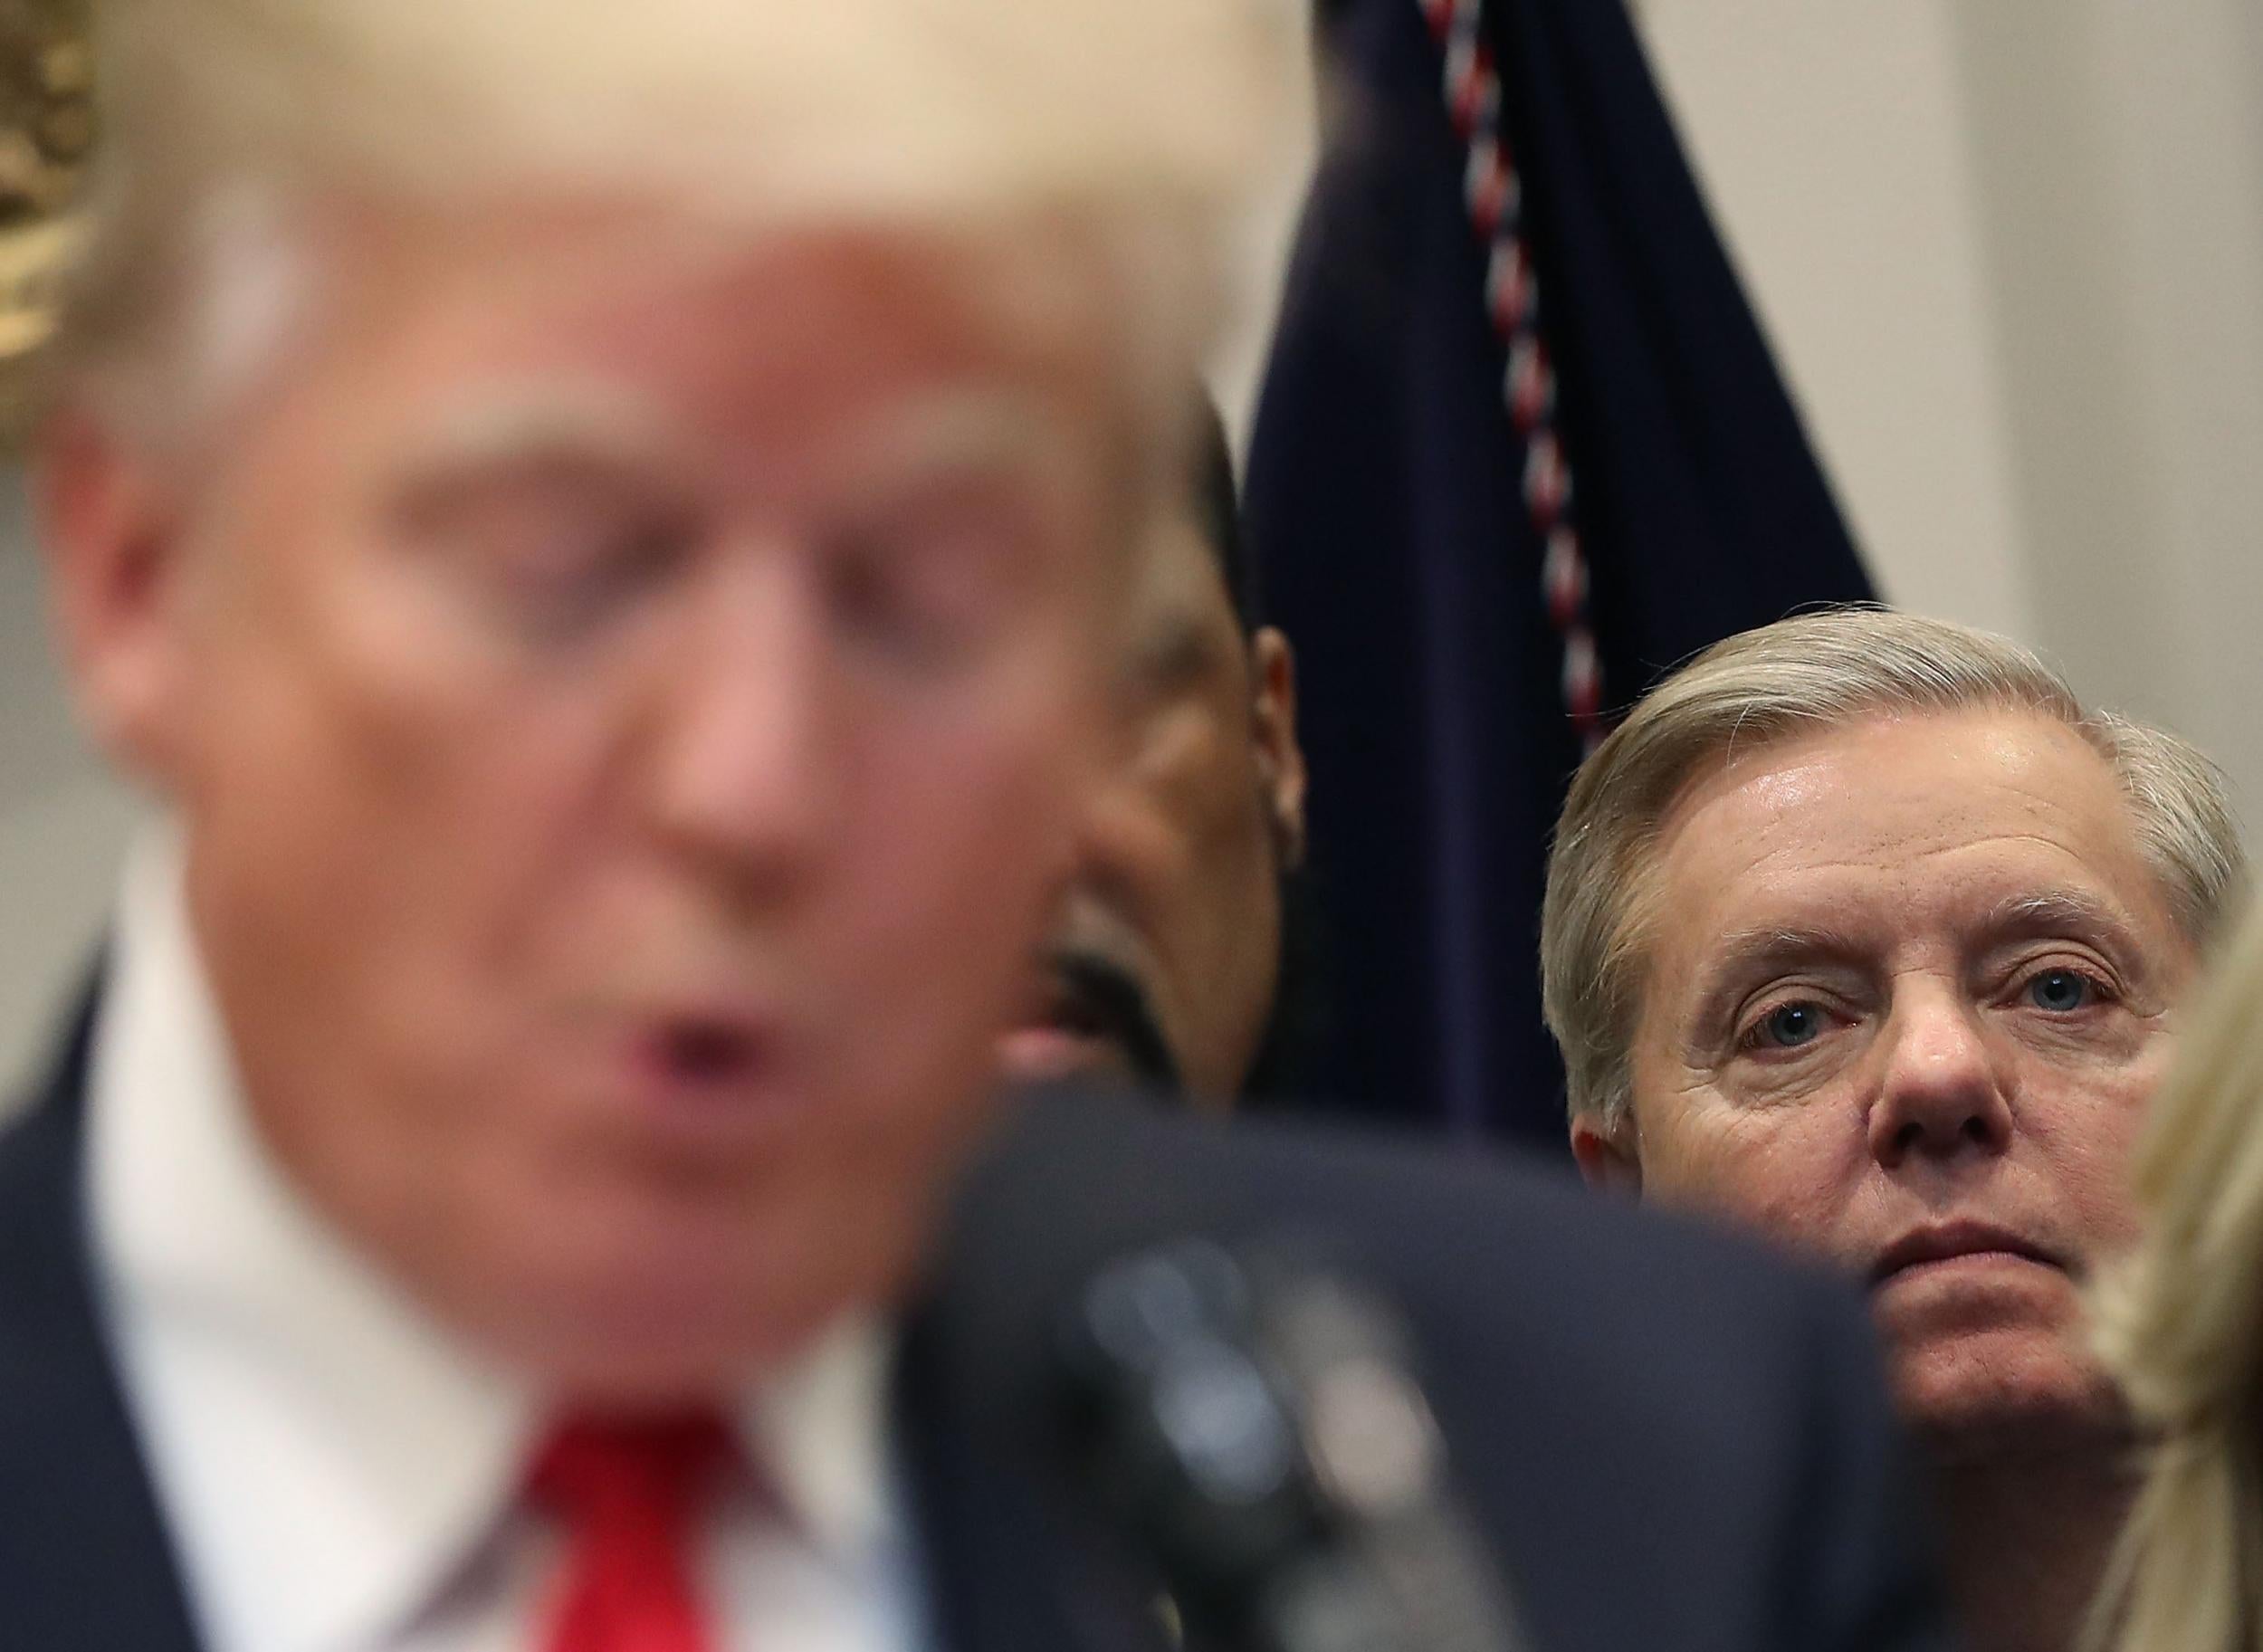 Lindsey Graham has donated $500,000 to overturning the election result